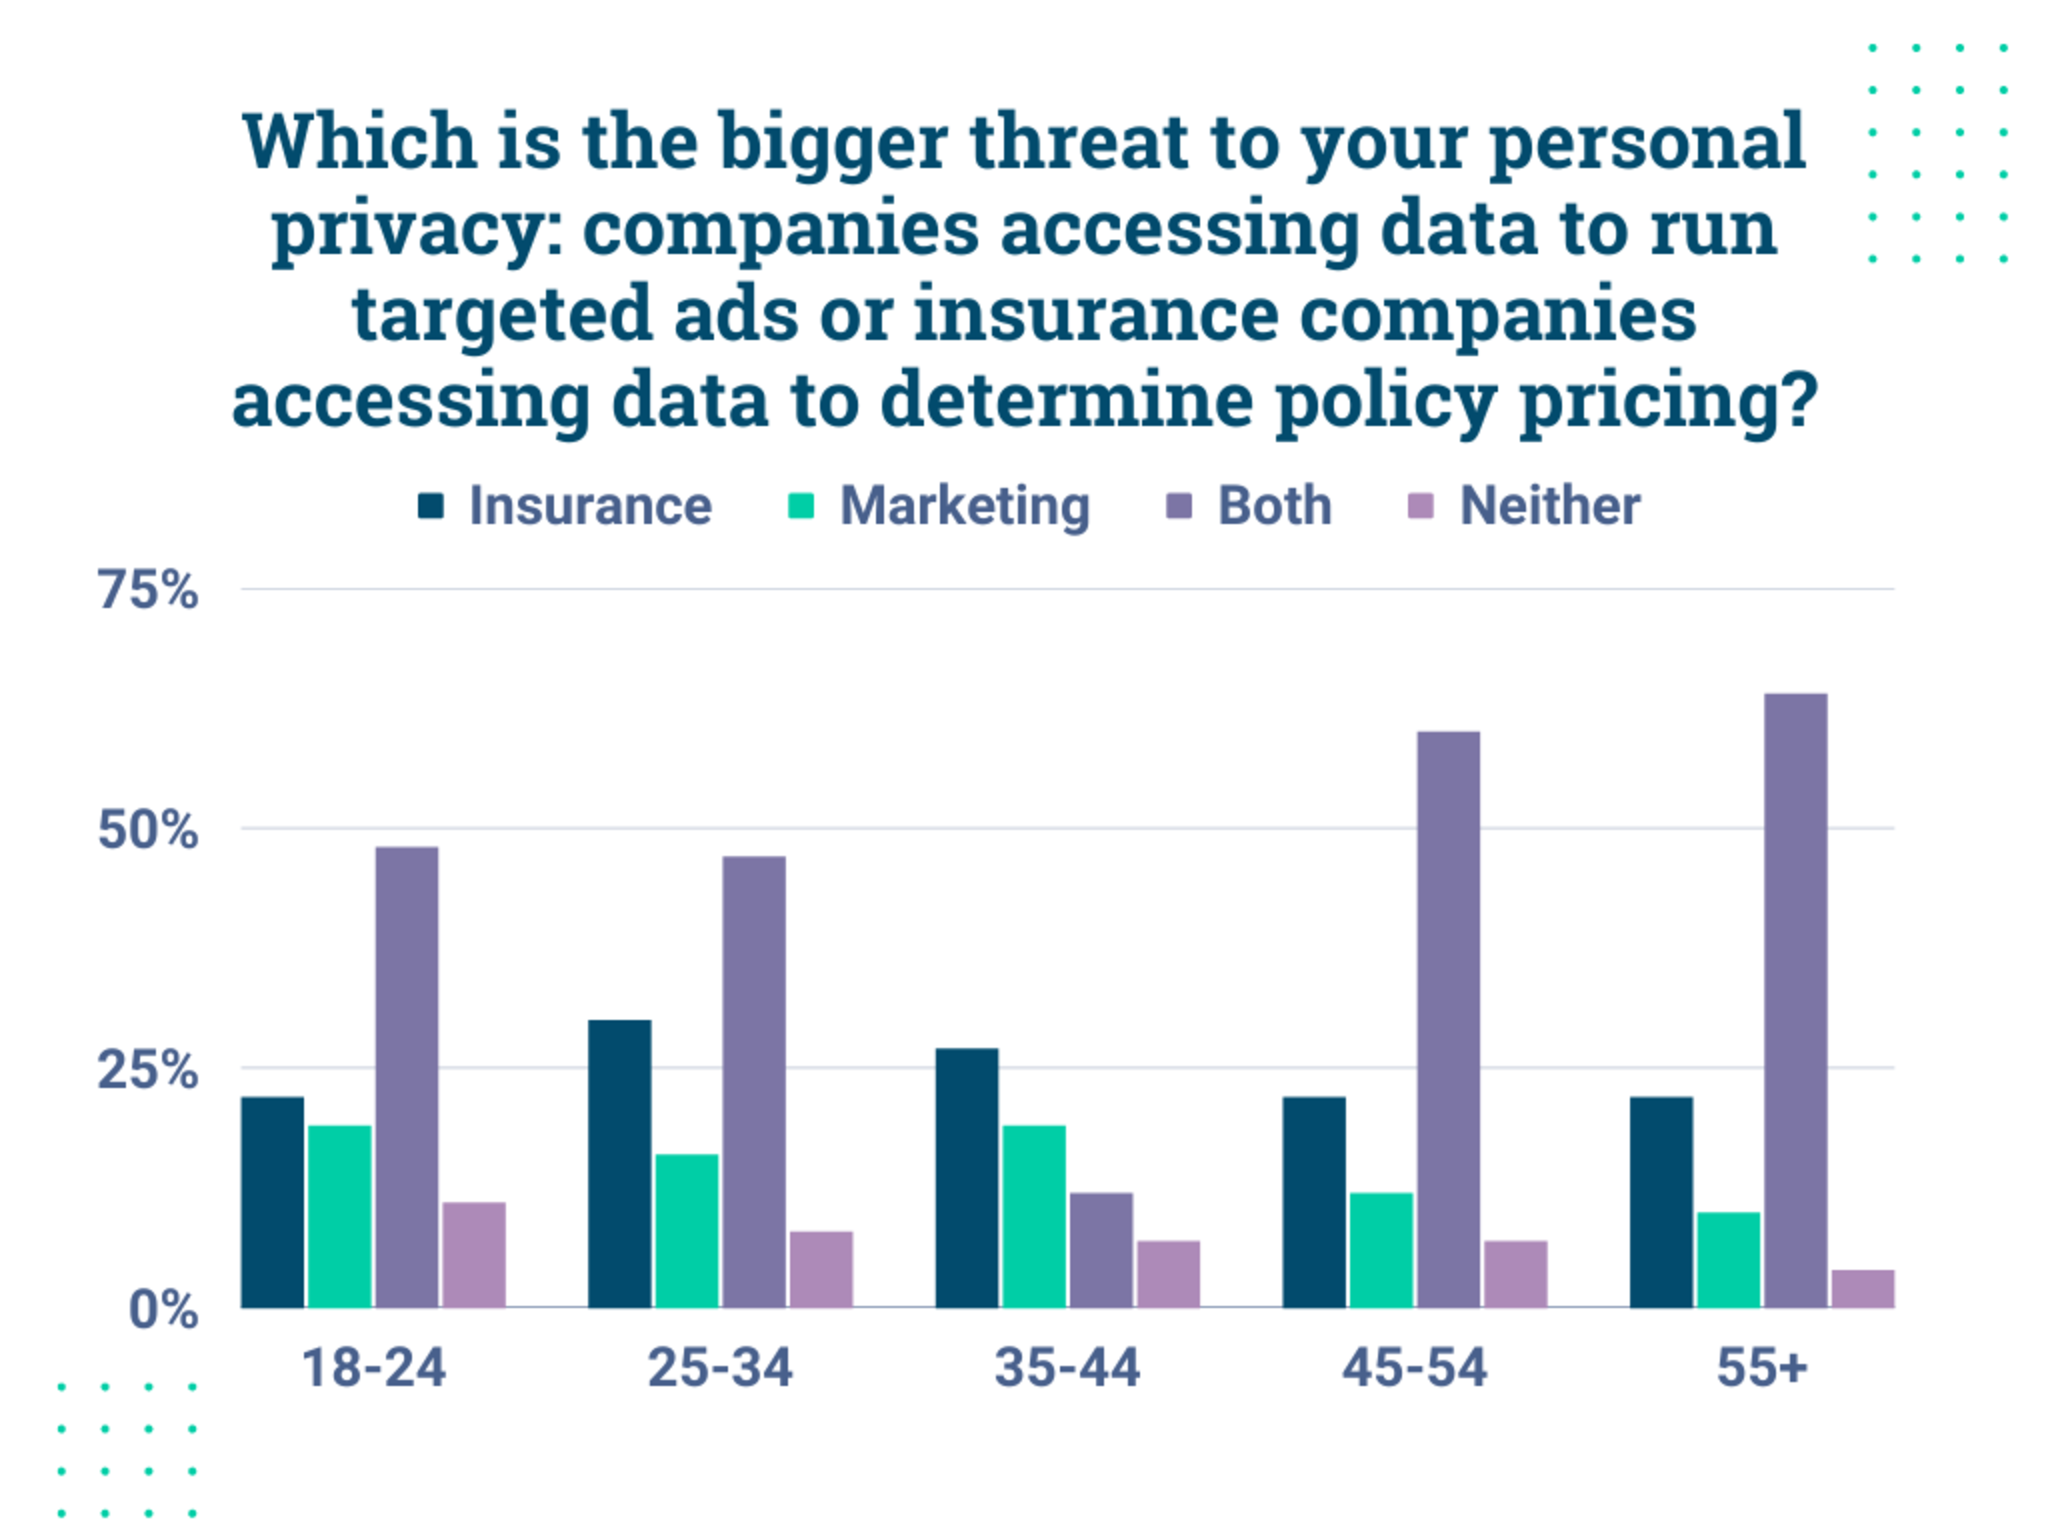 Which is the bigger threat to your personal privacy companies accessing data to run targeted ads or insurance companies accessing data to determine policy pricing